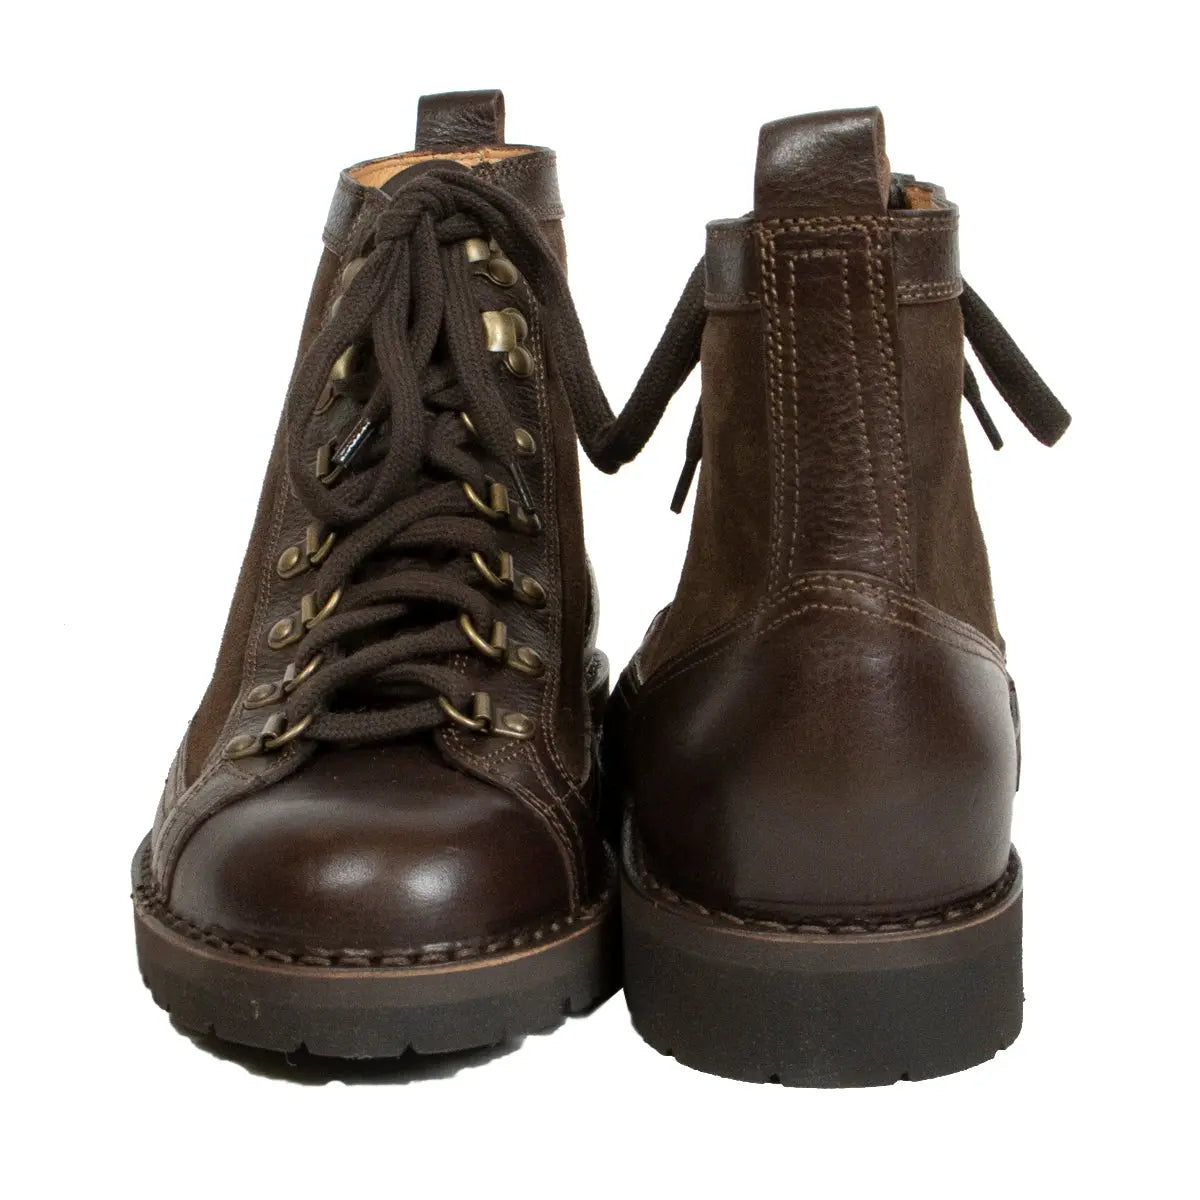 Brown Leather & Suede R302 Boots  Fracap   